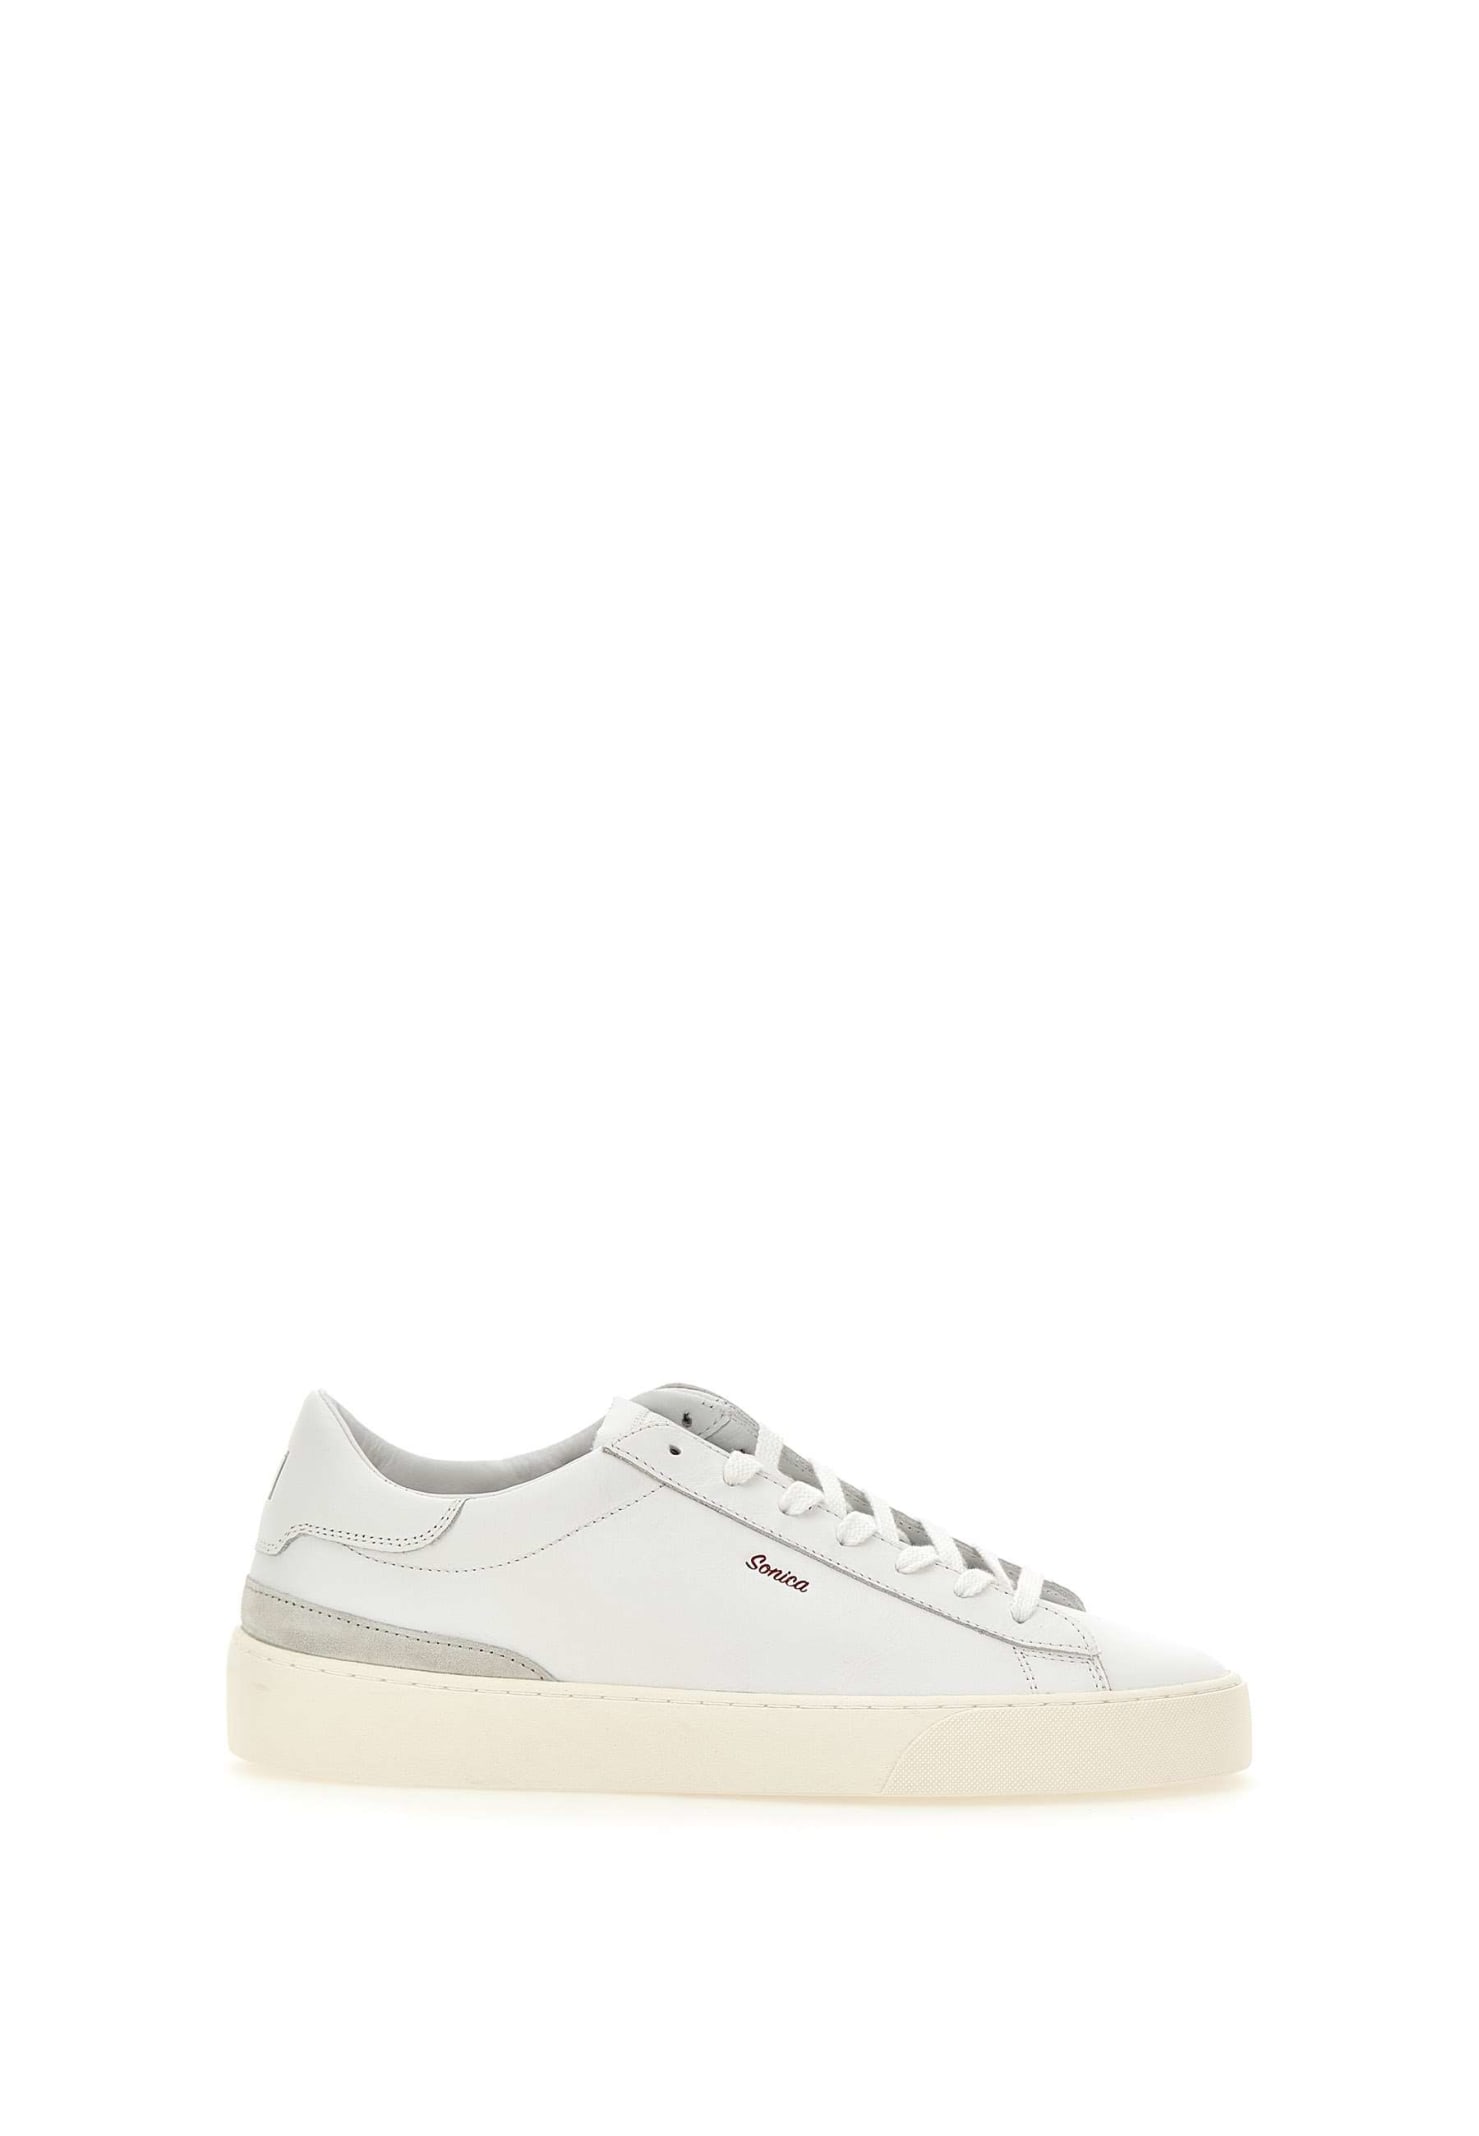 Shop Date Sonica Calf Leather Sneakers In White